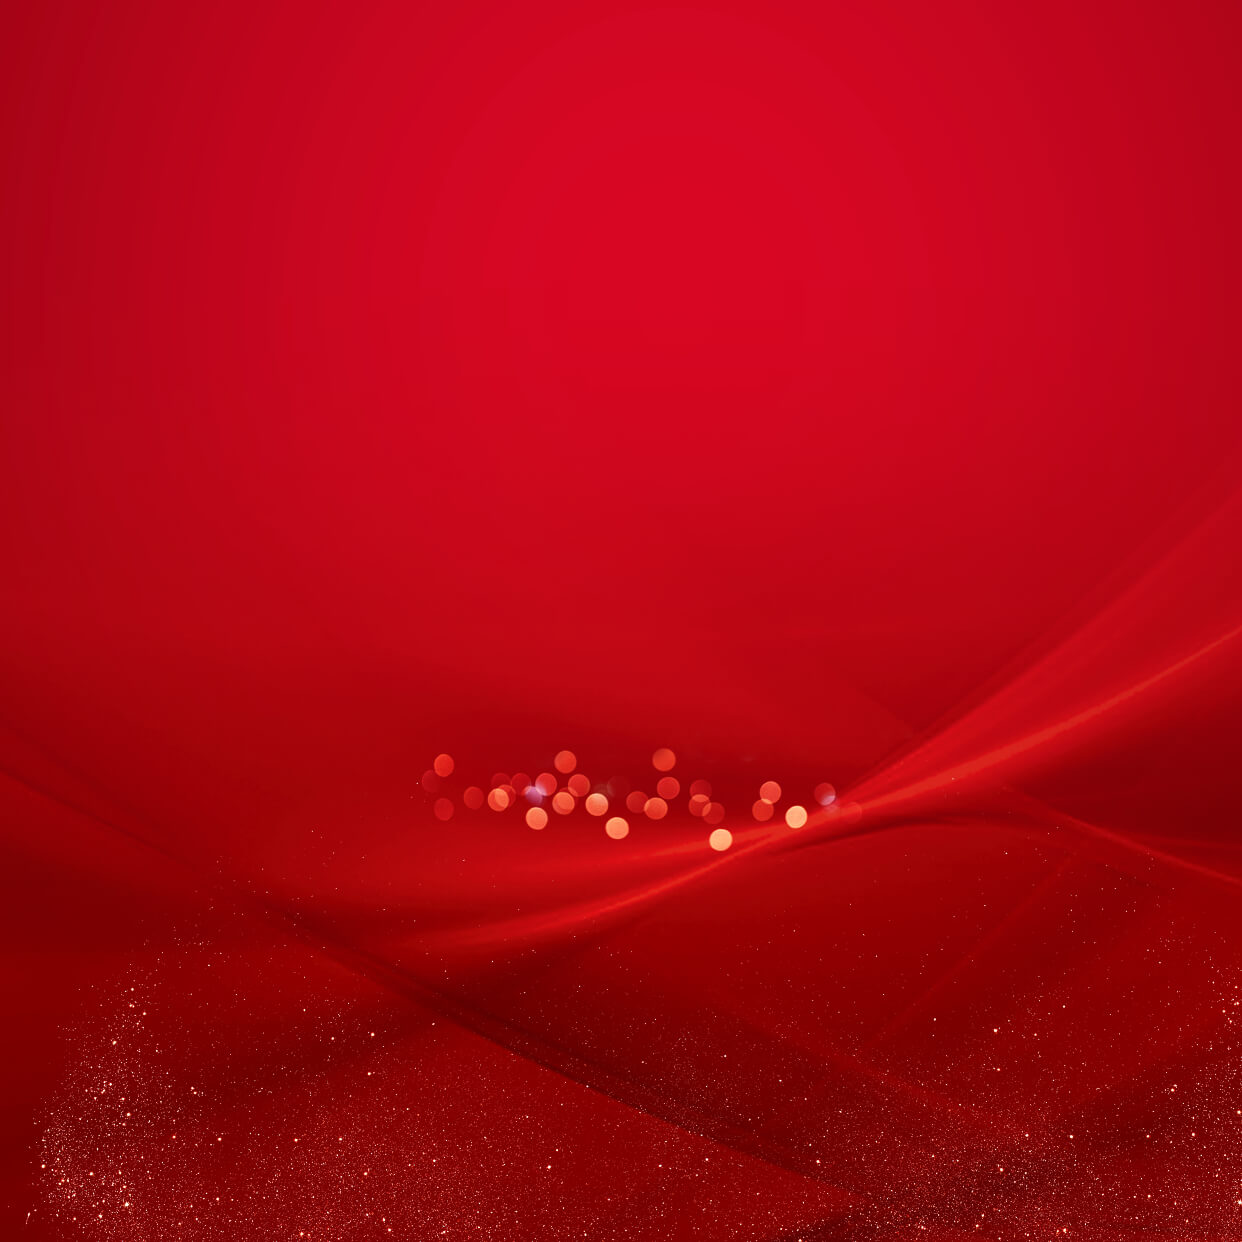 Windows 11 Wallpaper 4K Stock Red abstract 9058